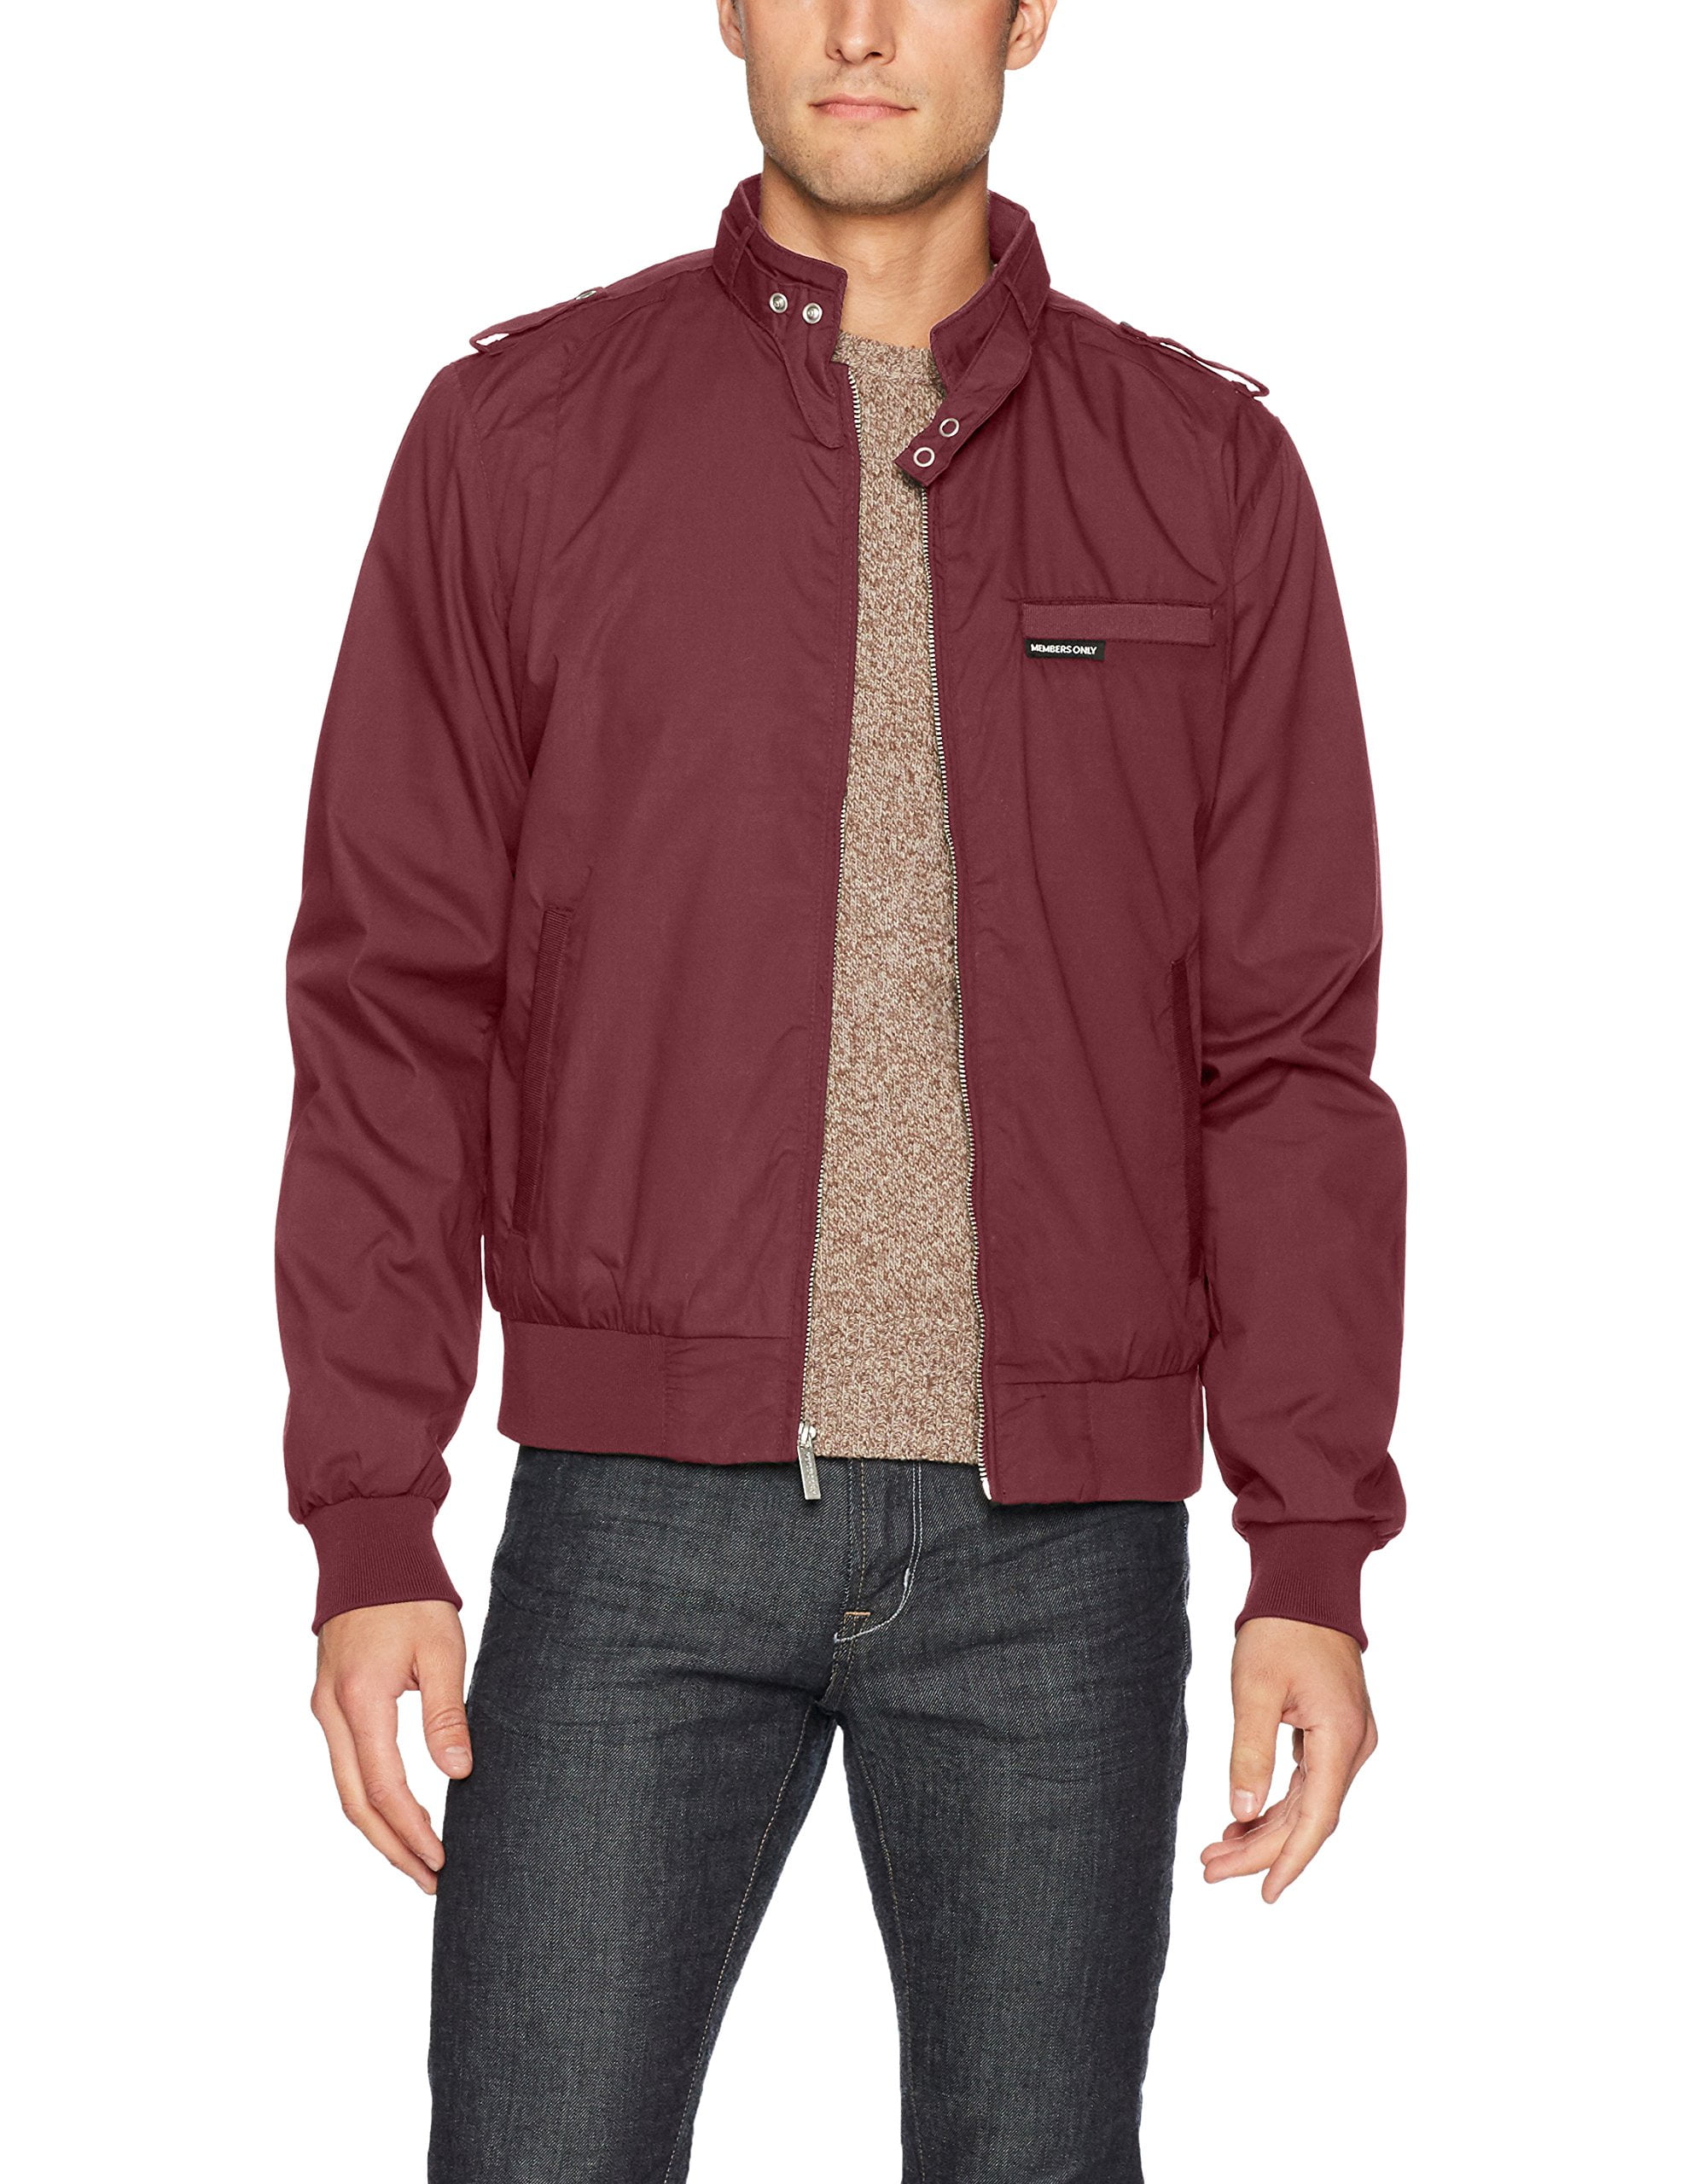 Members Only Men's Classic Iconic Racer Jacket SlimFit-Burgundy,M ...